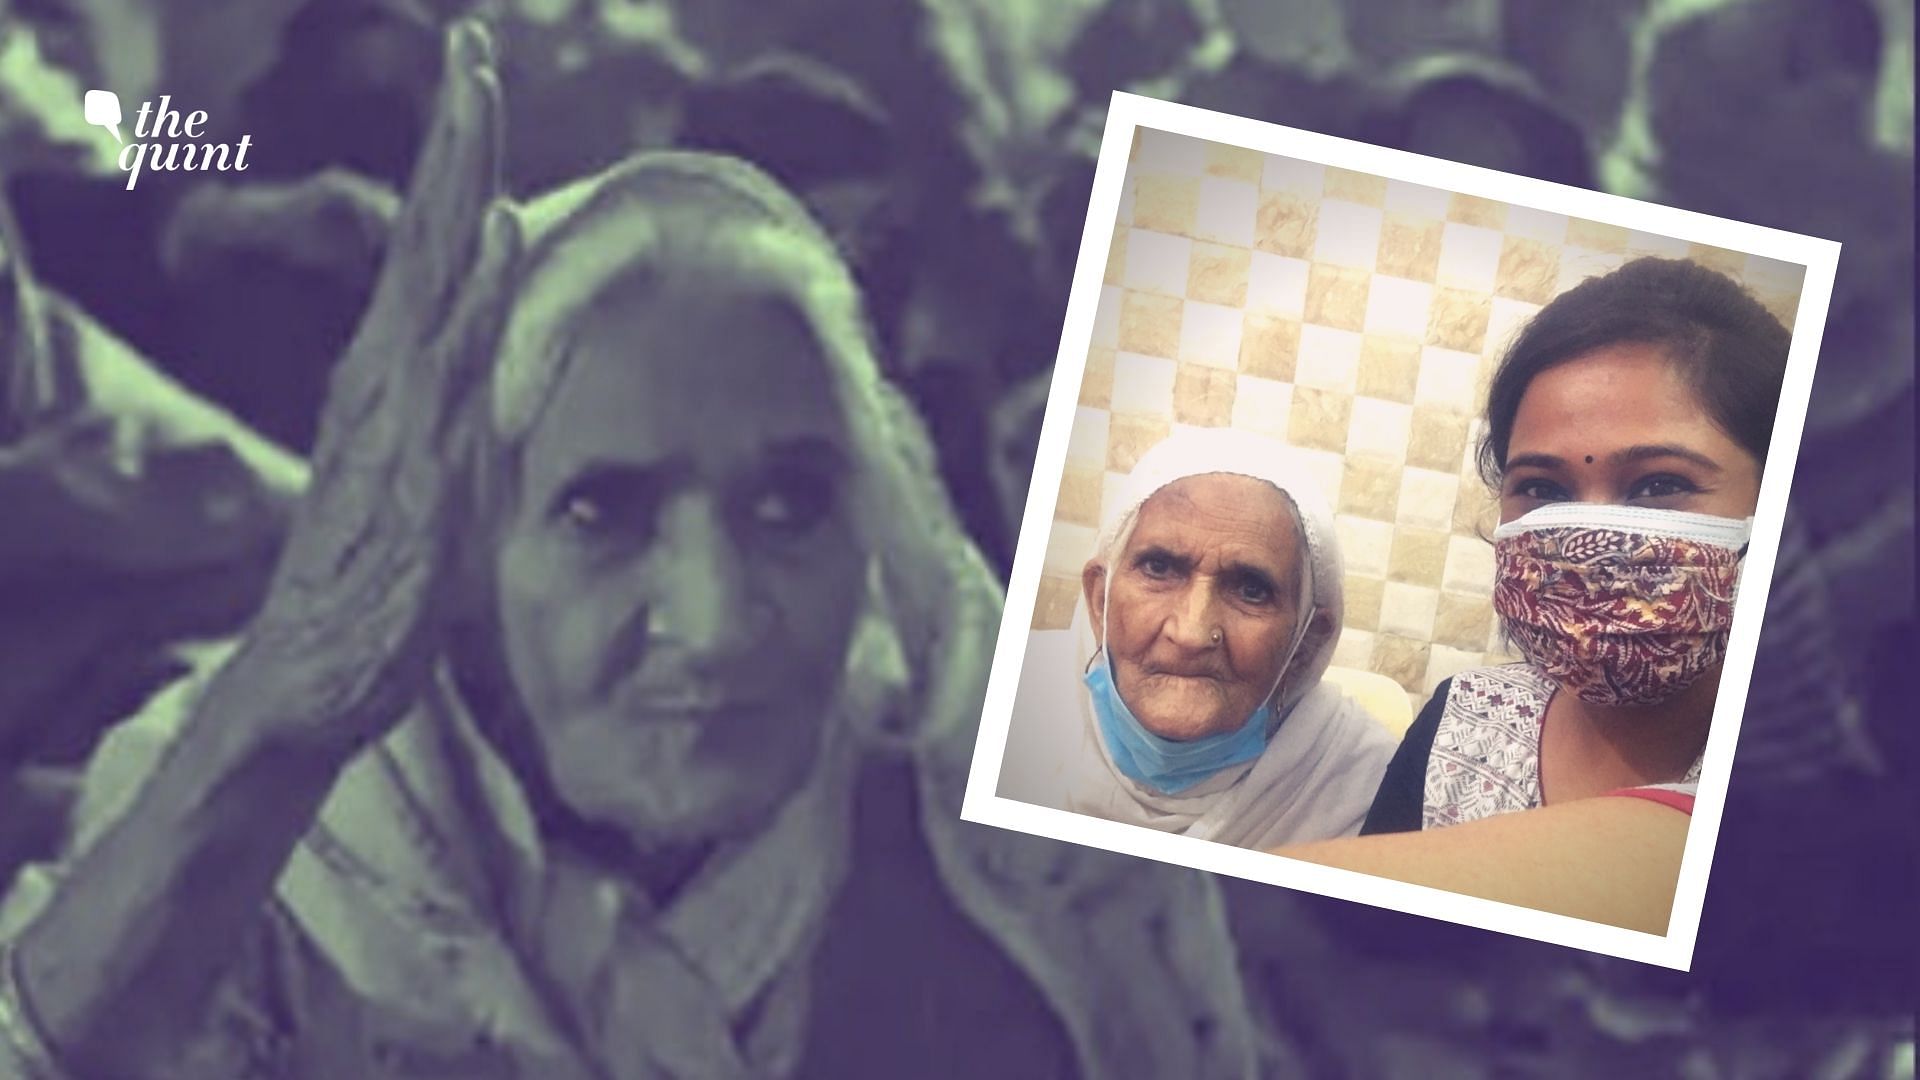 82-year-old protester from Shaheen Bagh made it to TIME’s list of 100 most infuential people.